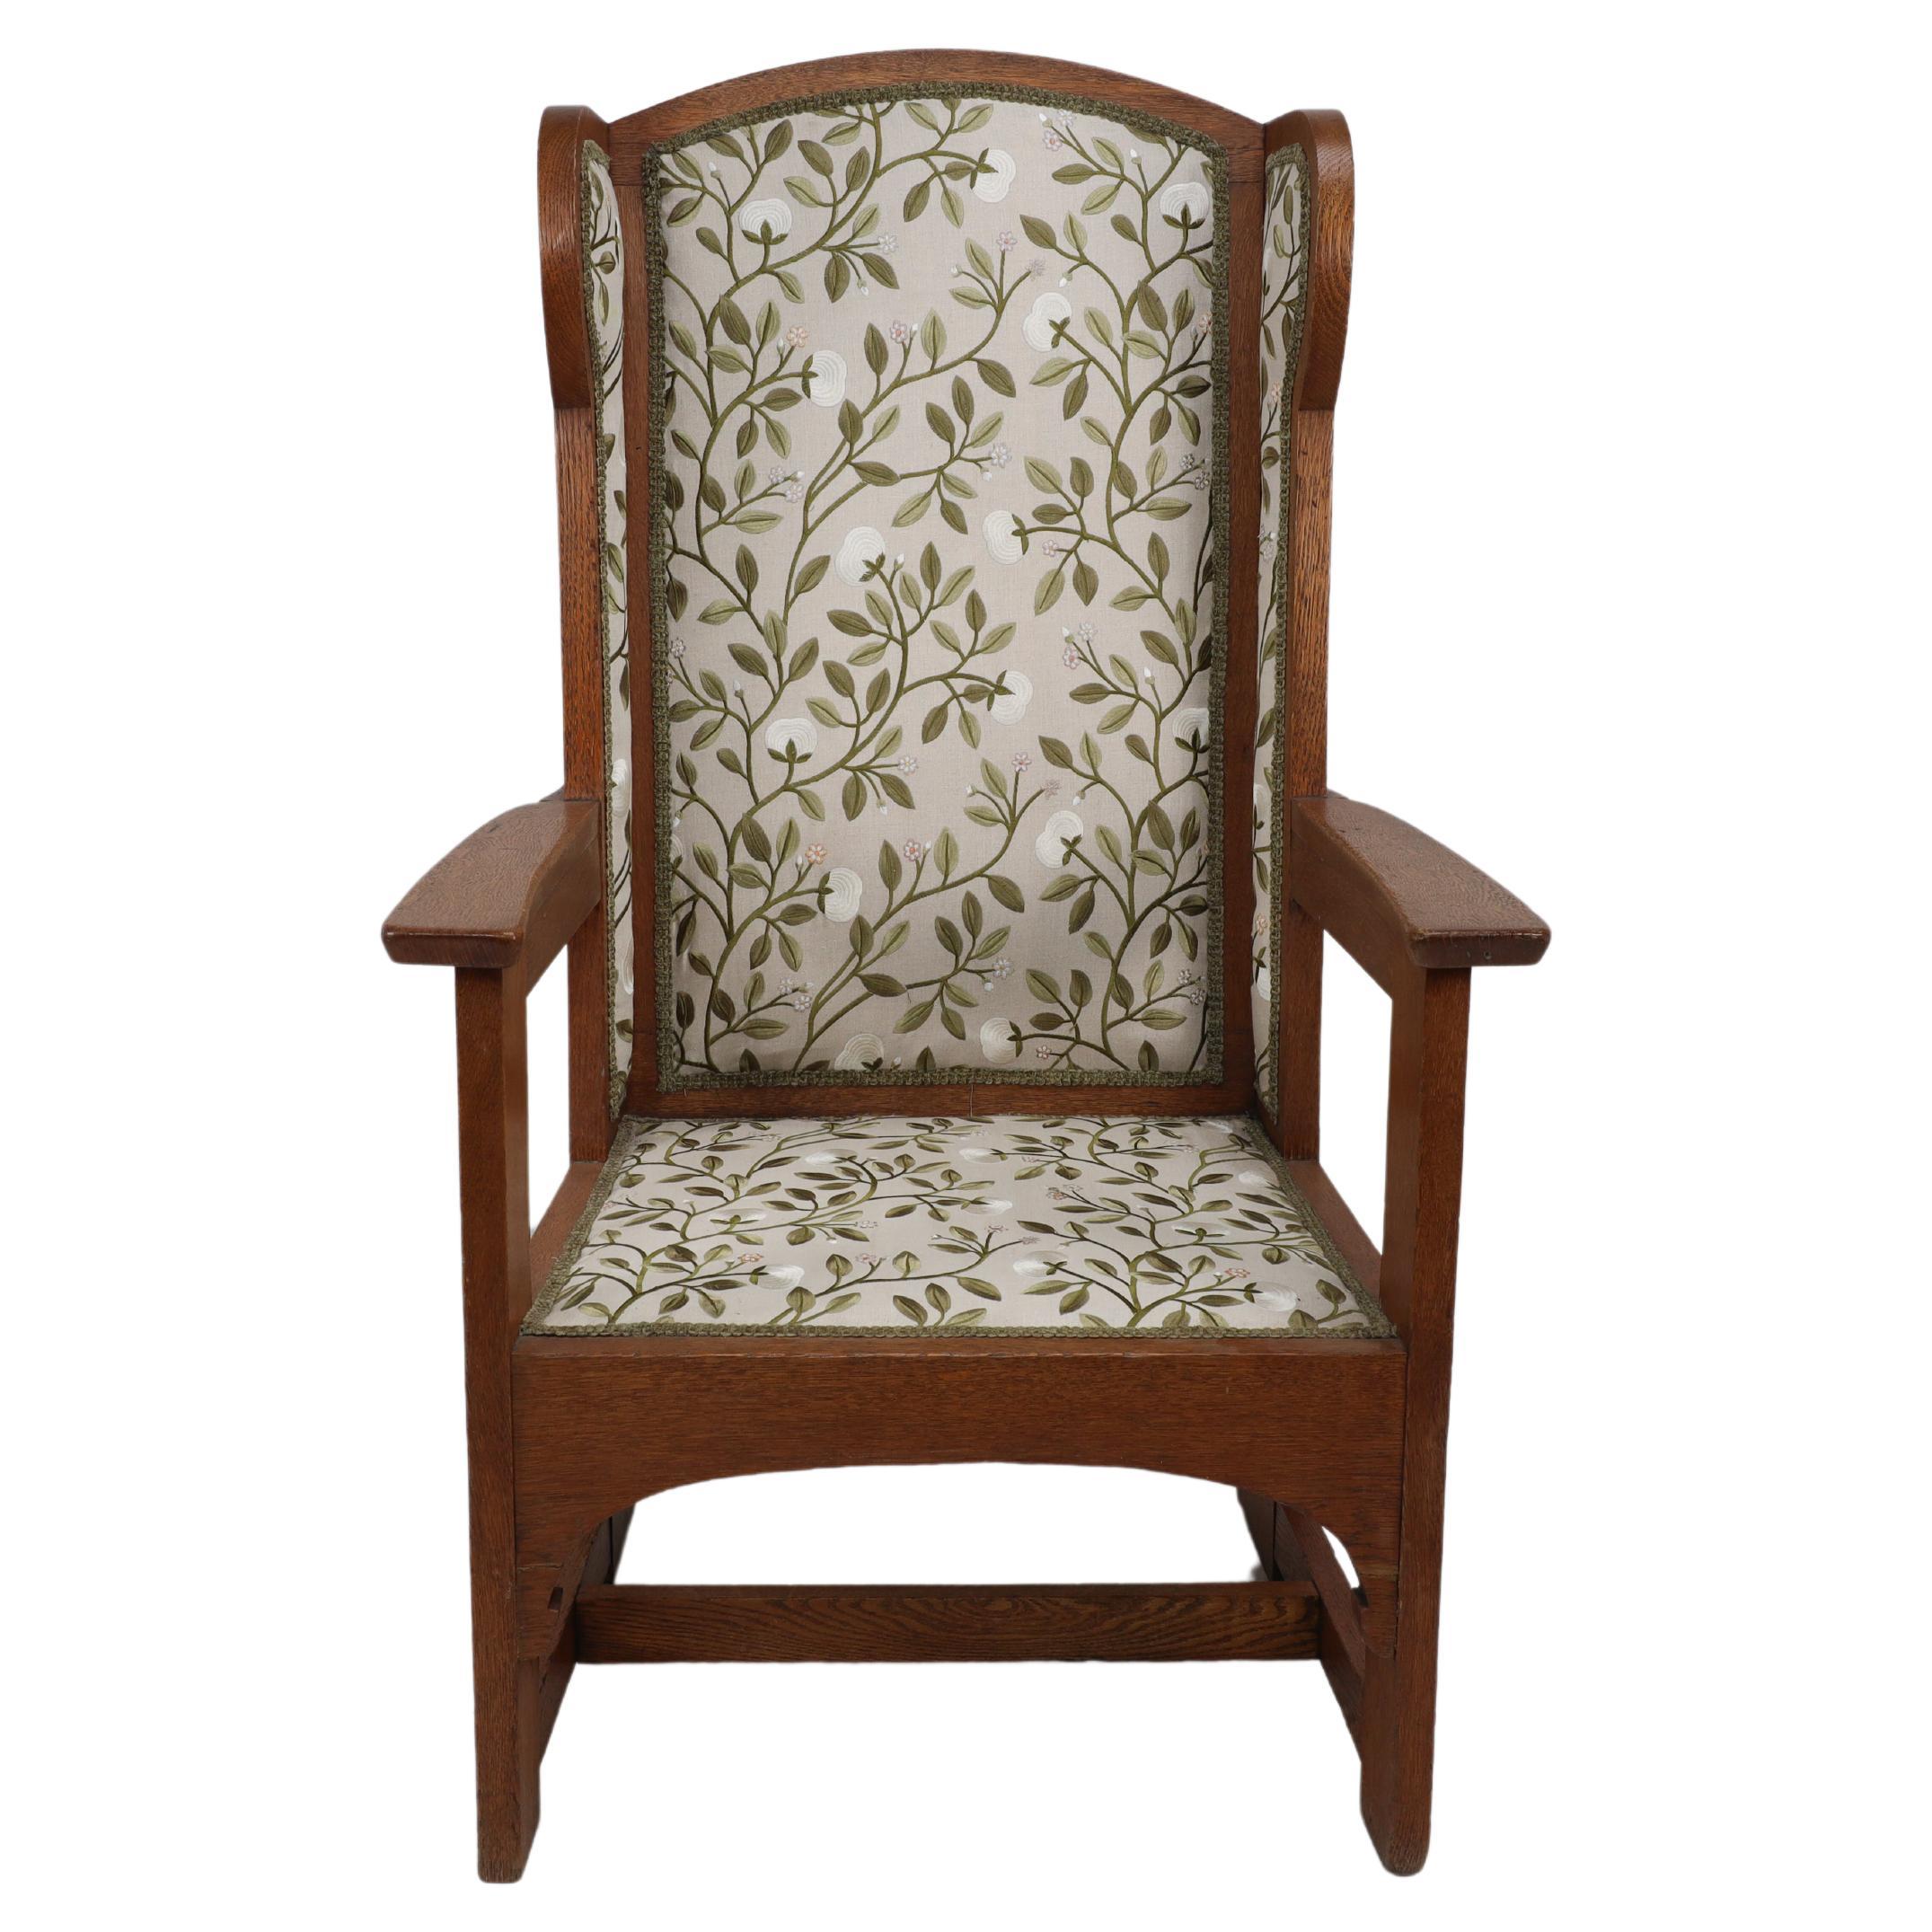 E G Punnet attributed. Probably made by William Birch and retailed by Goodyers of Regent Street. An Arts and Crafts oak wing back hall armchair using flat sided construction. With flowing arched aprons below the seat. Professionally re upholstered.